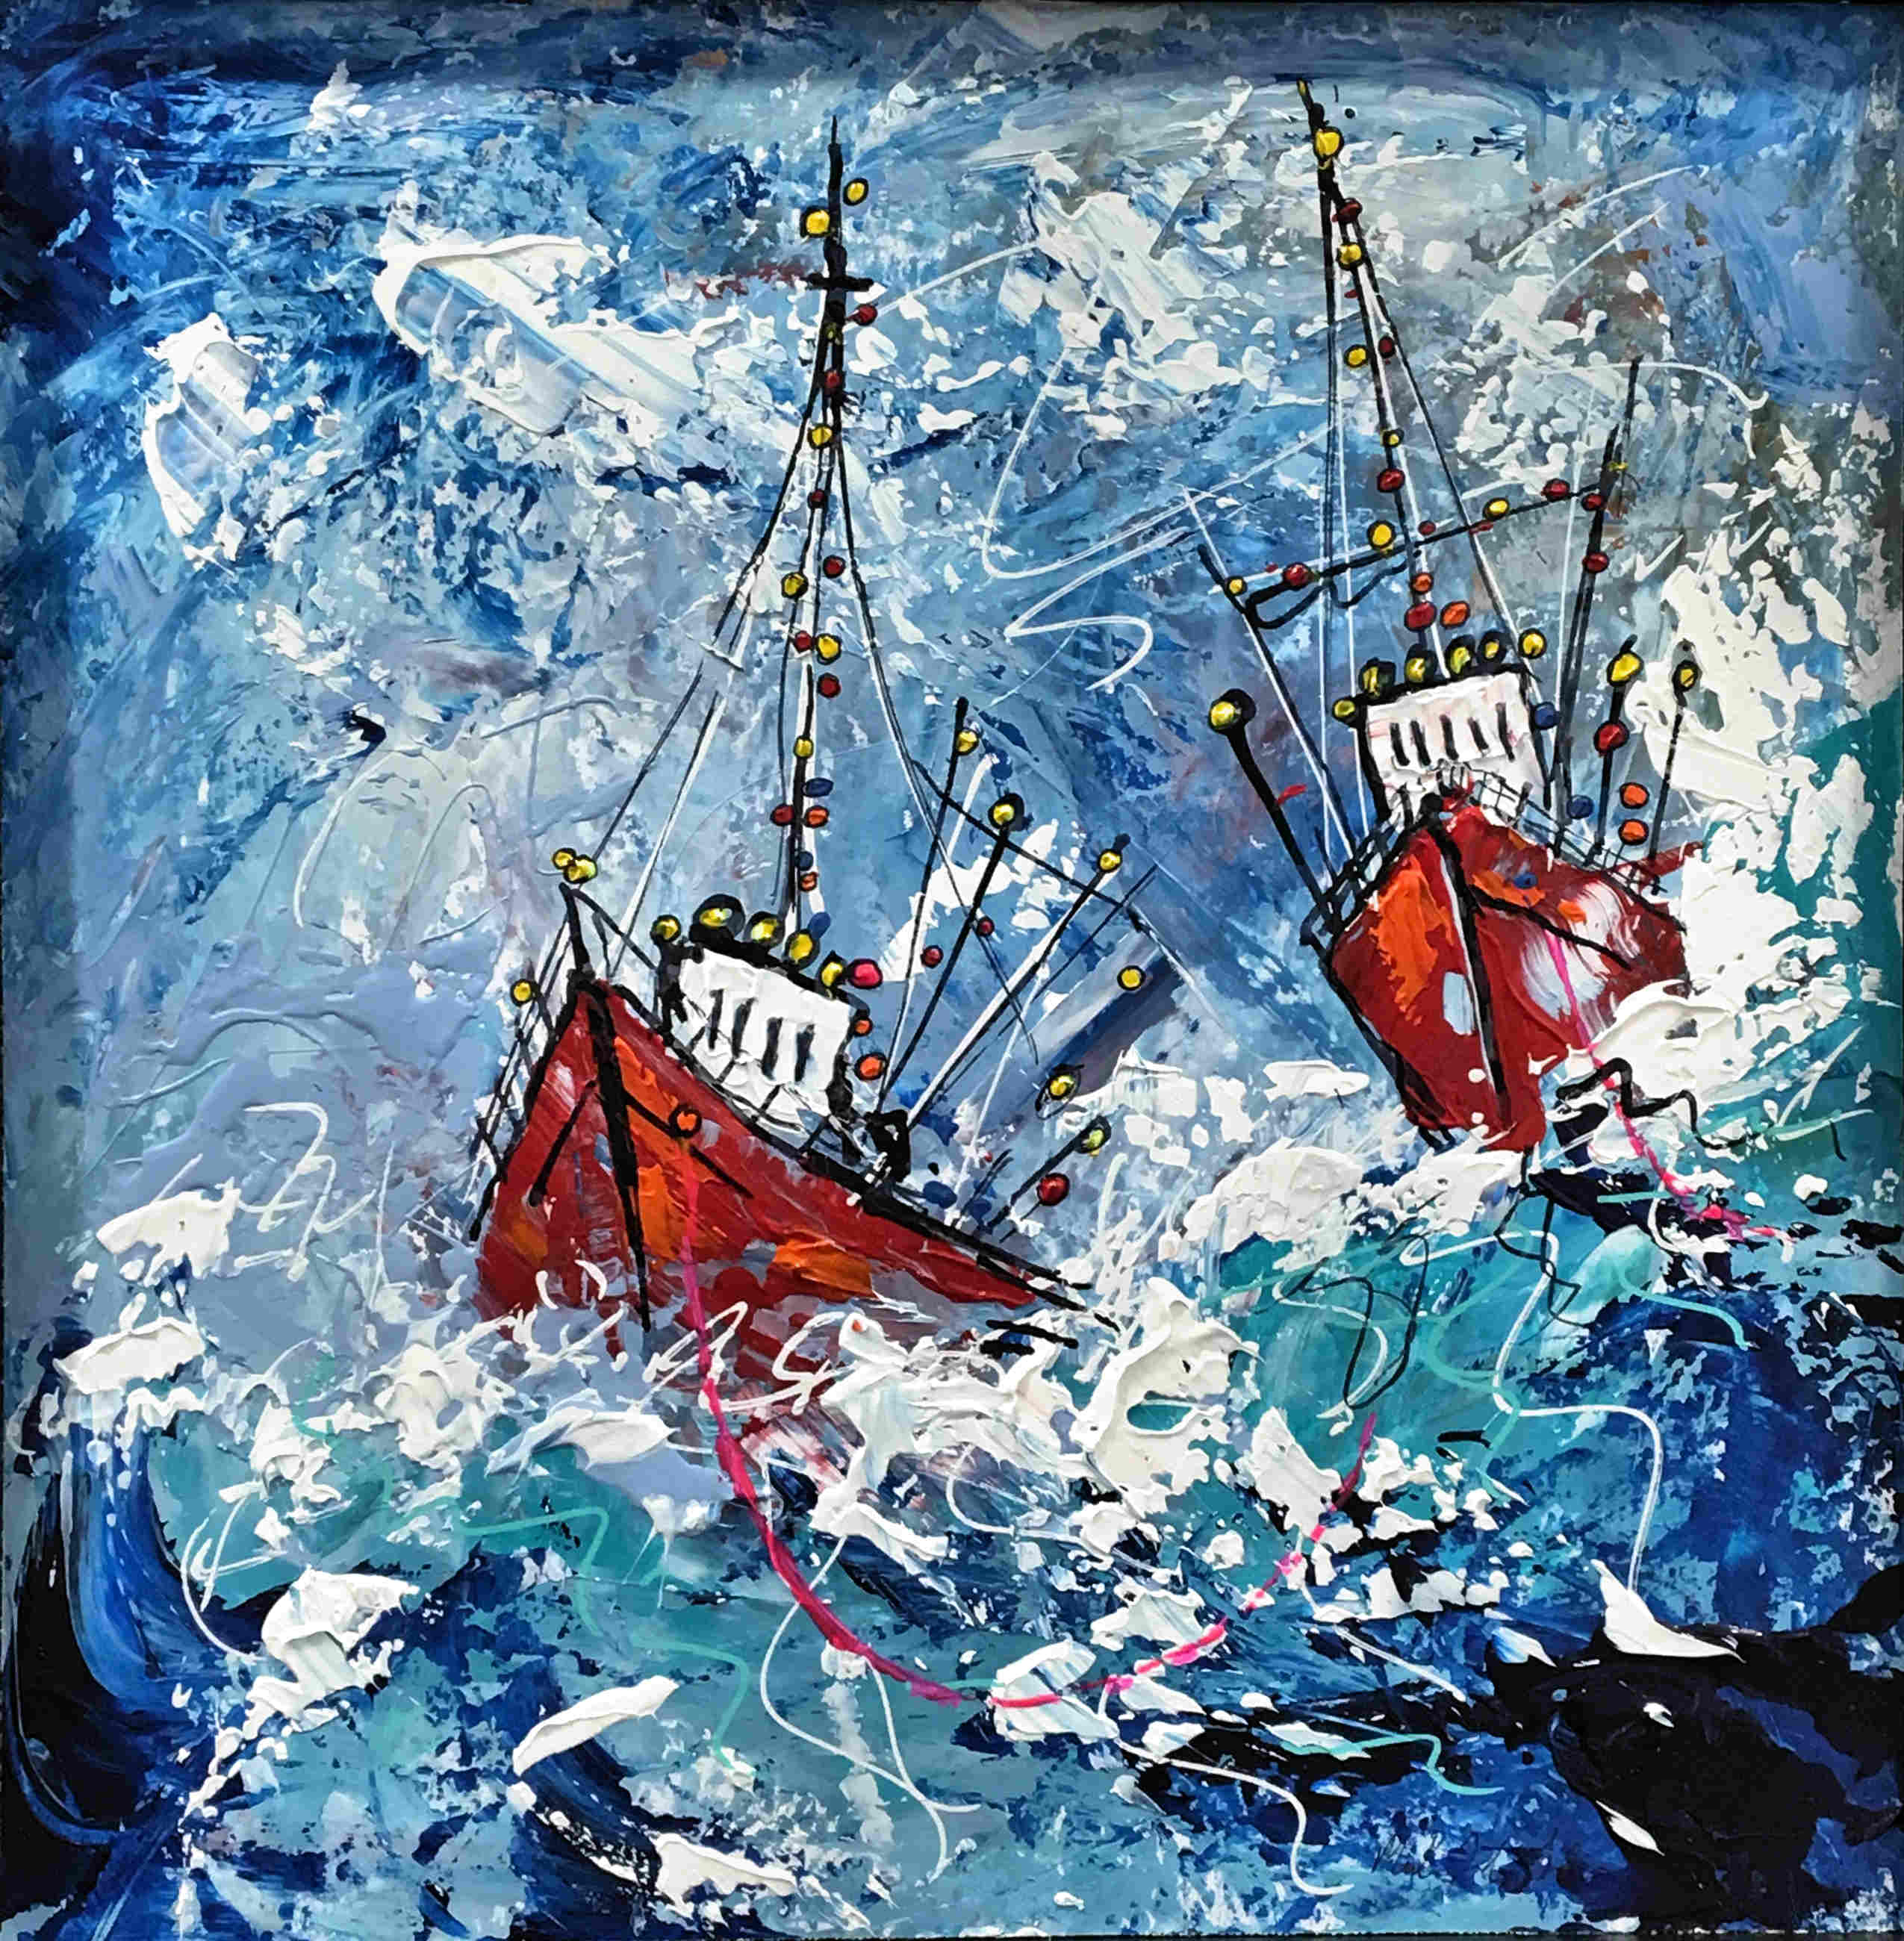 'Return with the Tide' by artist Martin John Fowler